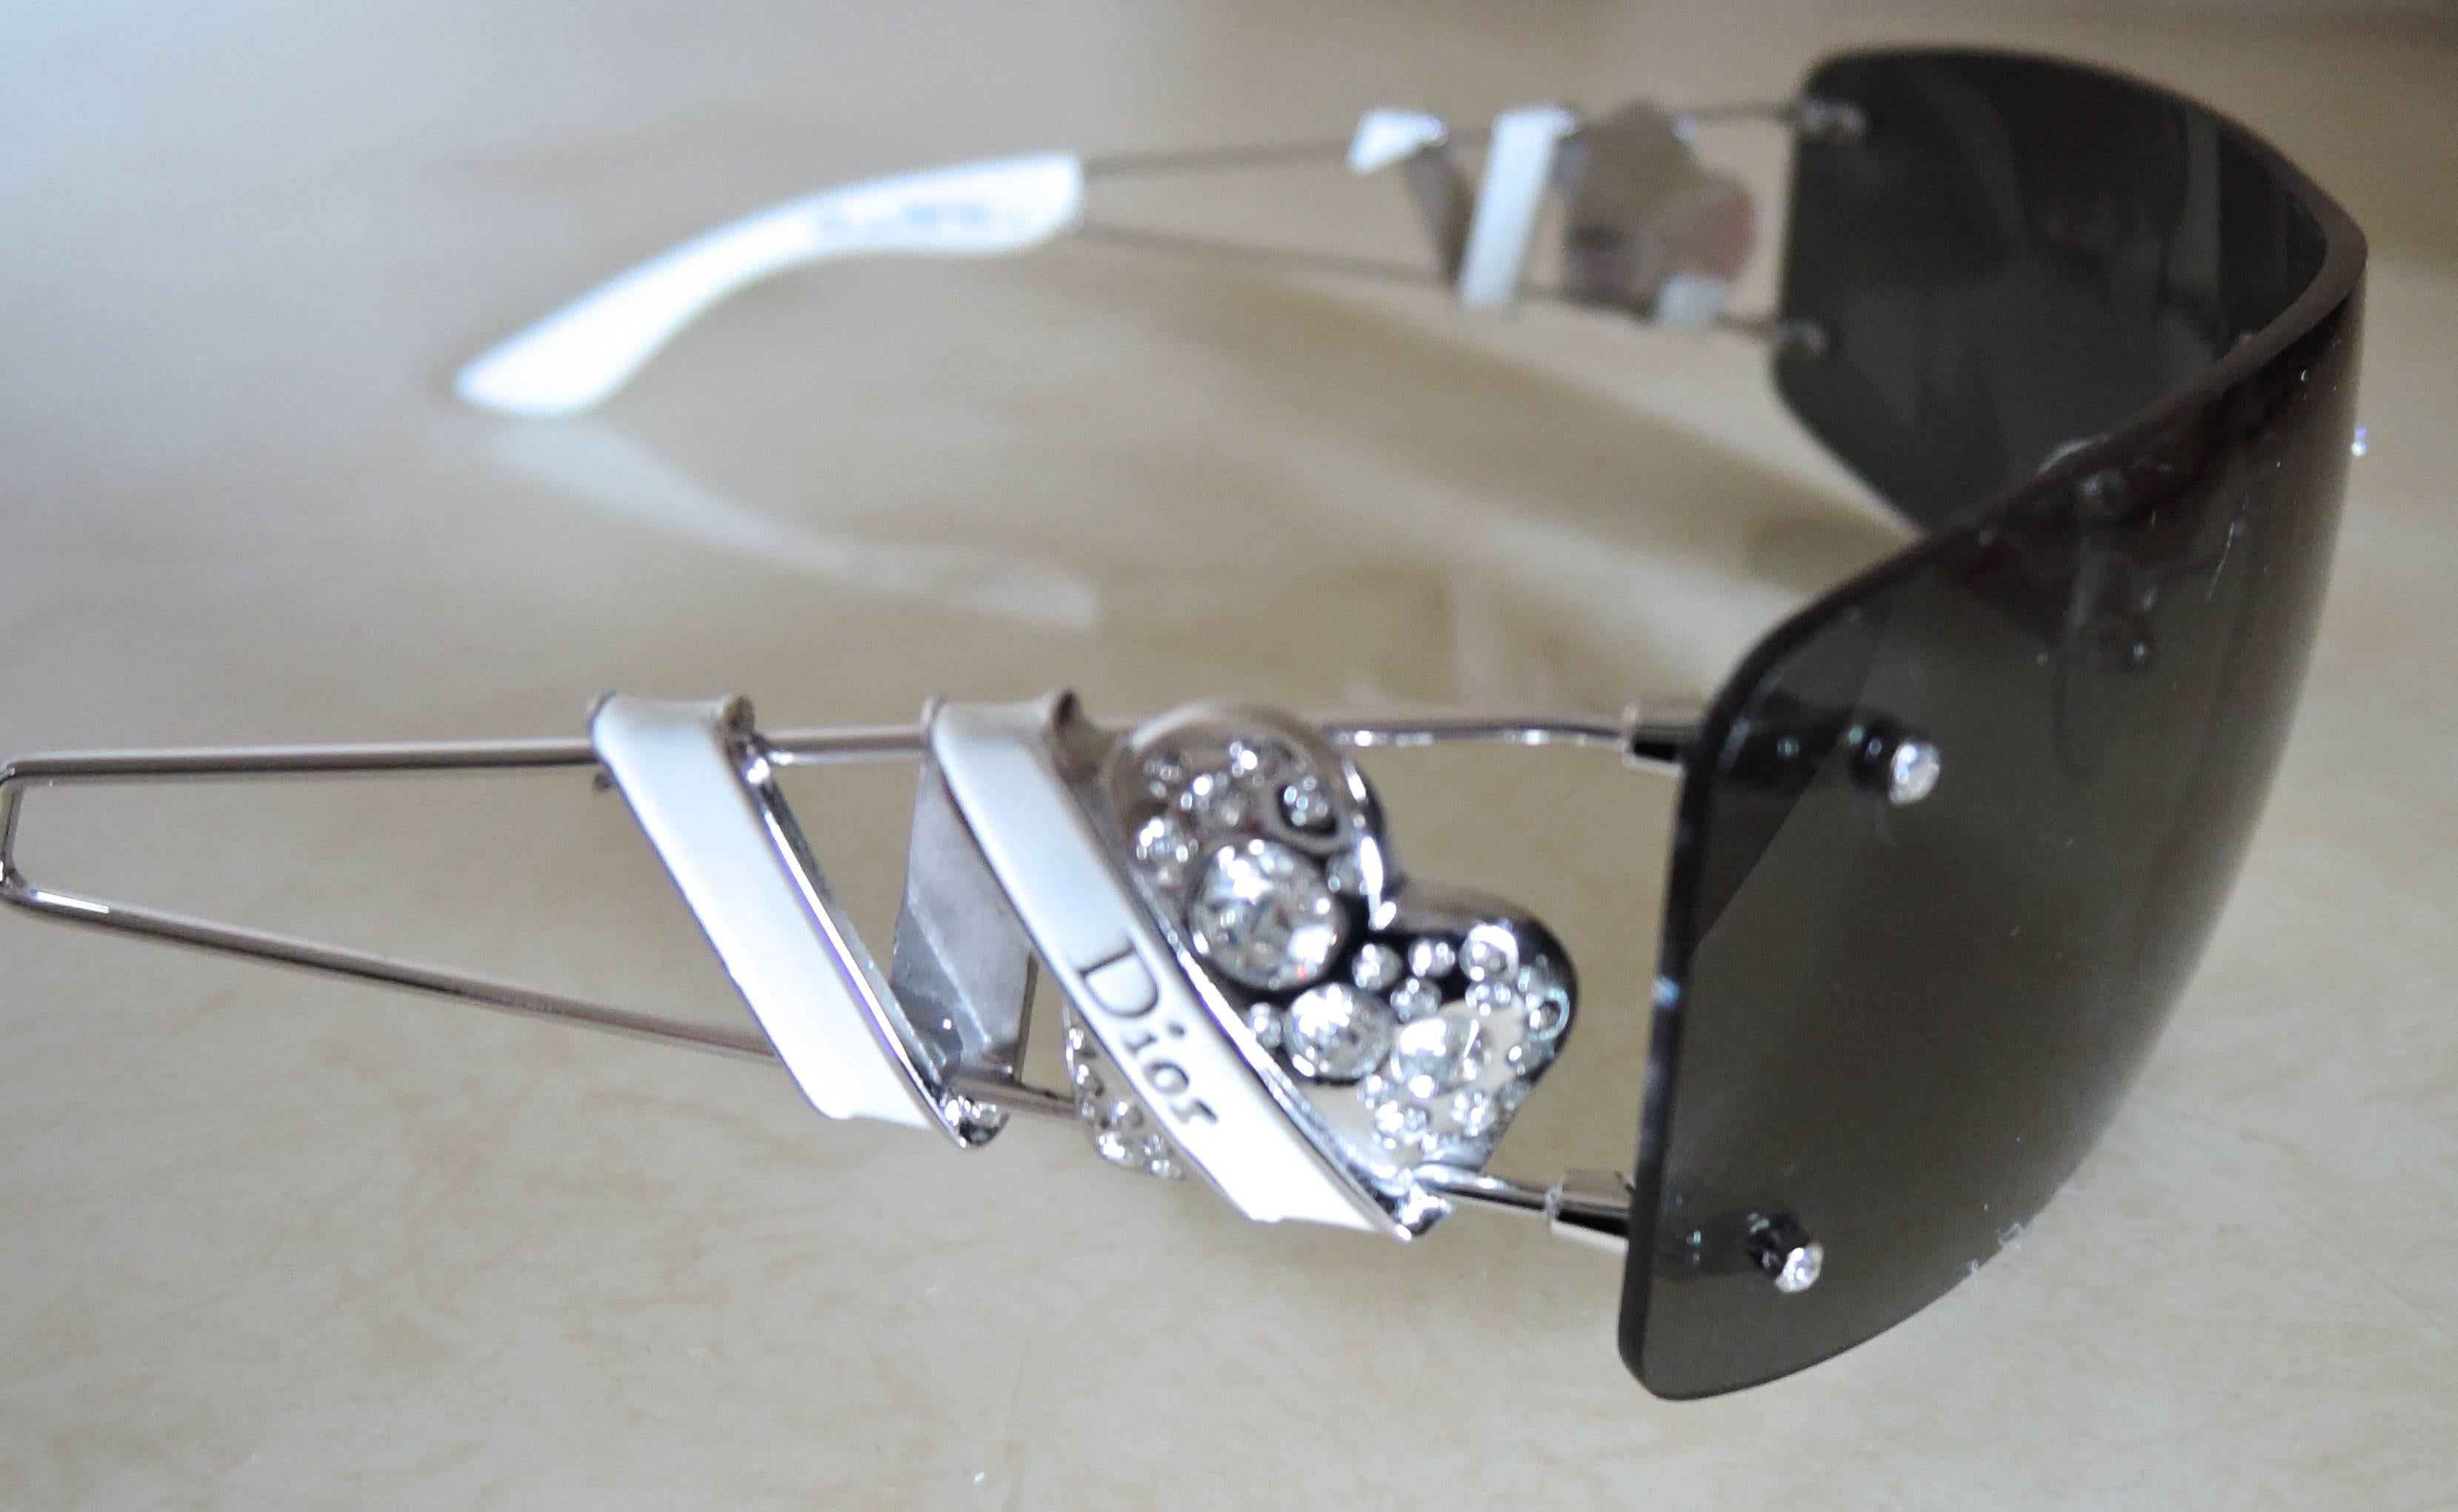 I purchased these CD Famous heart core sunglasses myself from an authorised dealer many years ago,  and I worn them a few hours with extremely care, hence there's no any signs of worn. 
These sunglasses were fully handmade with exquisite details,